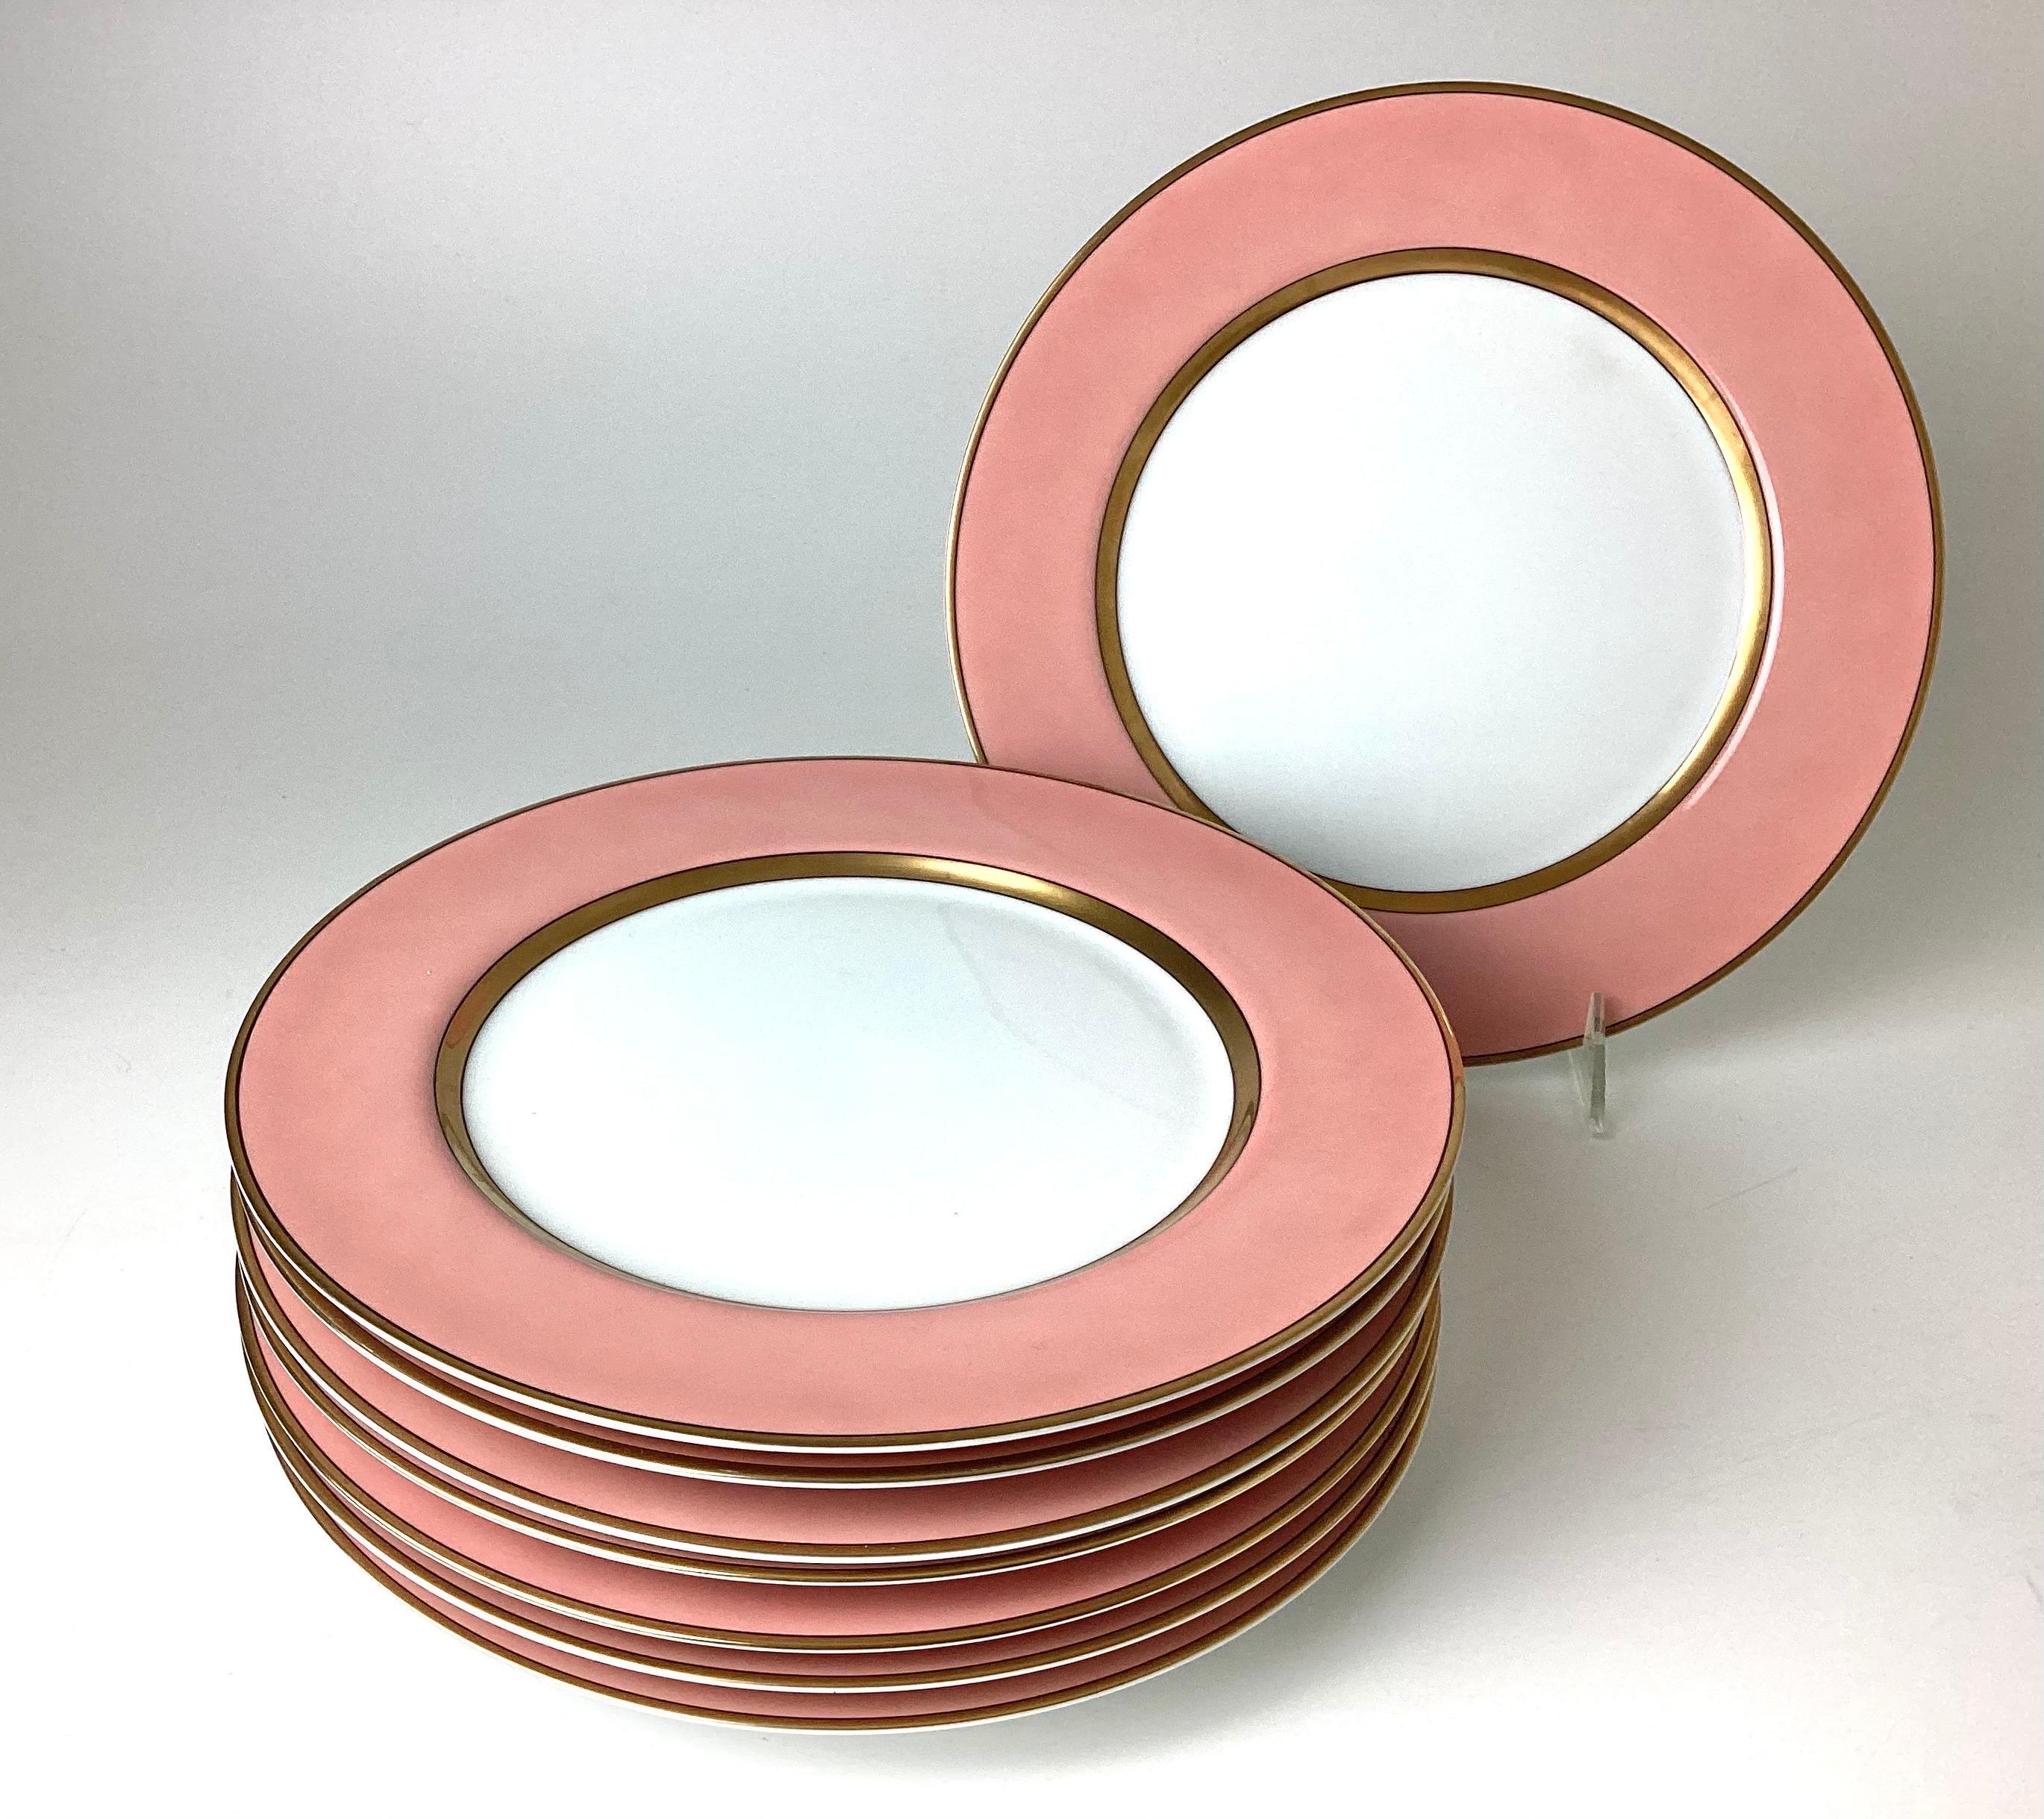 Fitz and Floyd dinner plates renaissance peach with wide gold verge line set of 8. All in great condition.